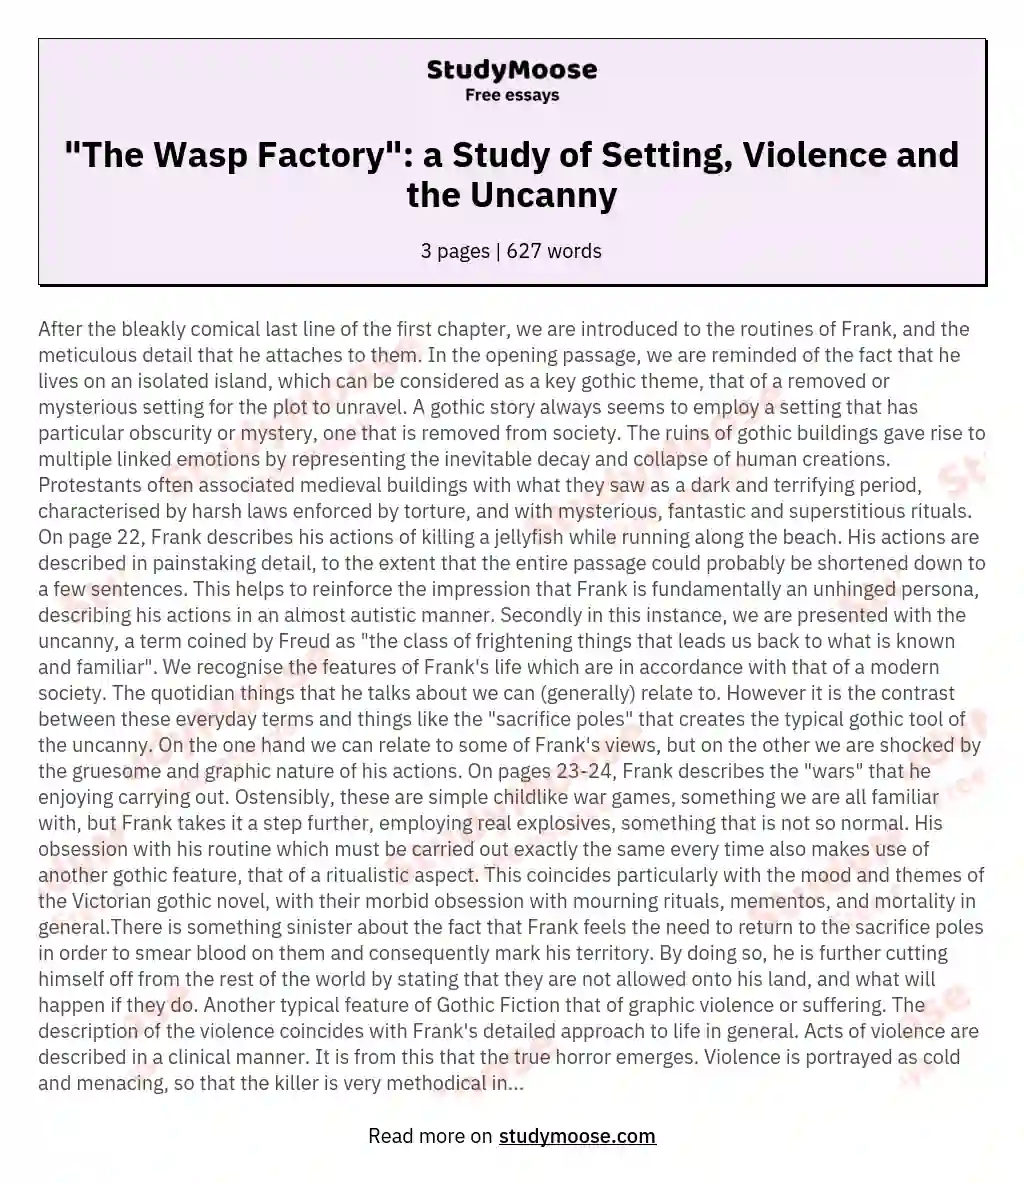 "The Wasp Factory": a Study of Setting, Violence and the Uncanny essay